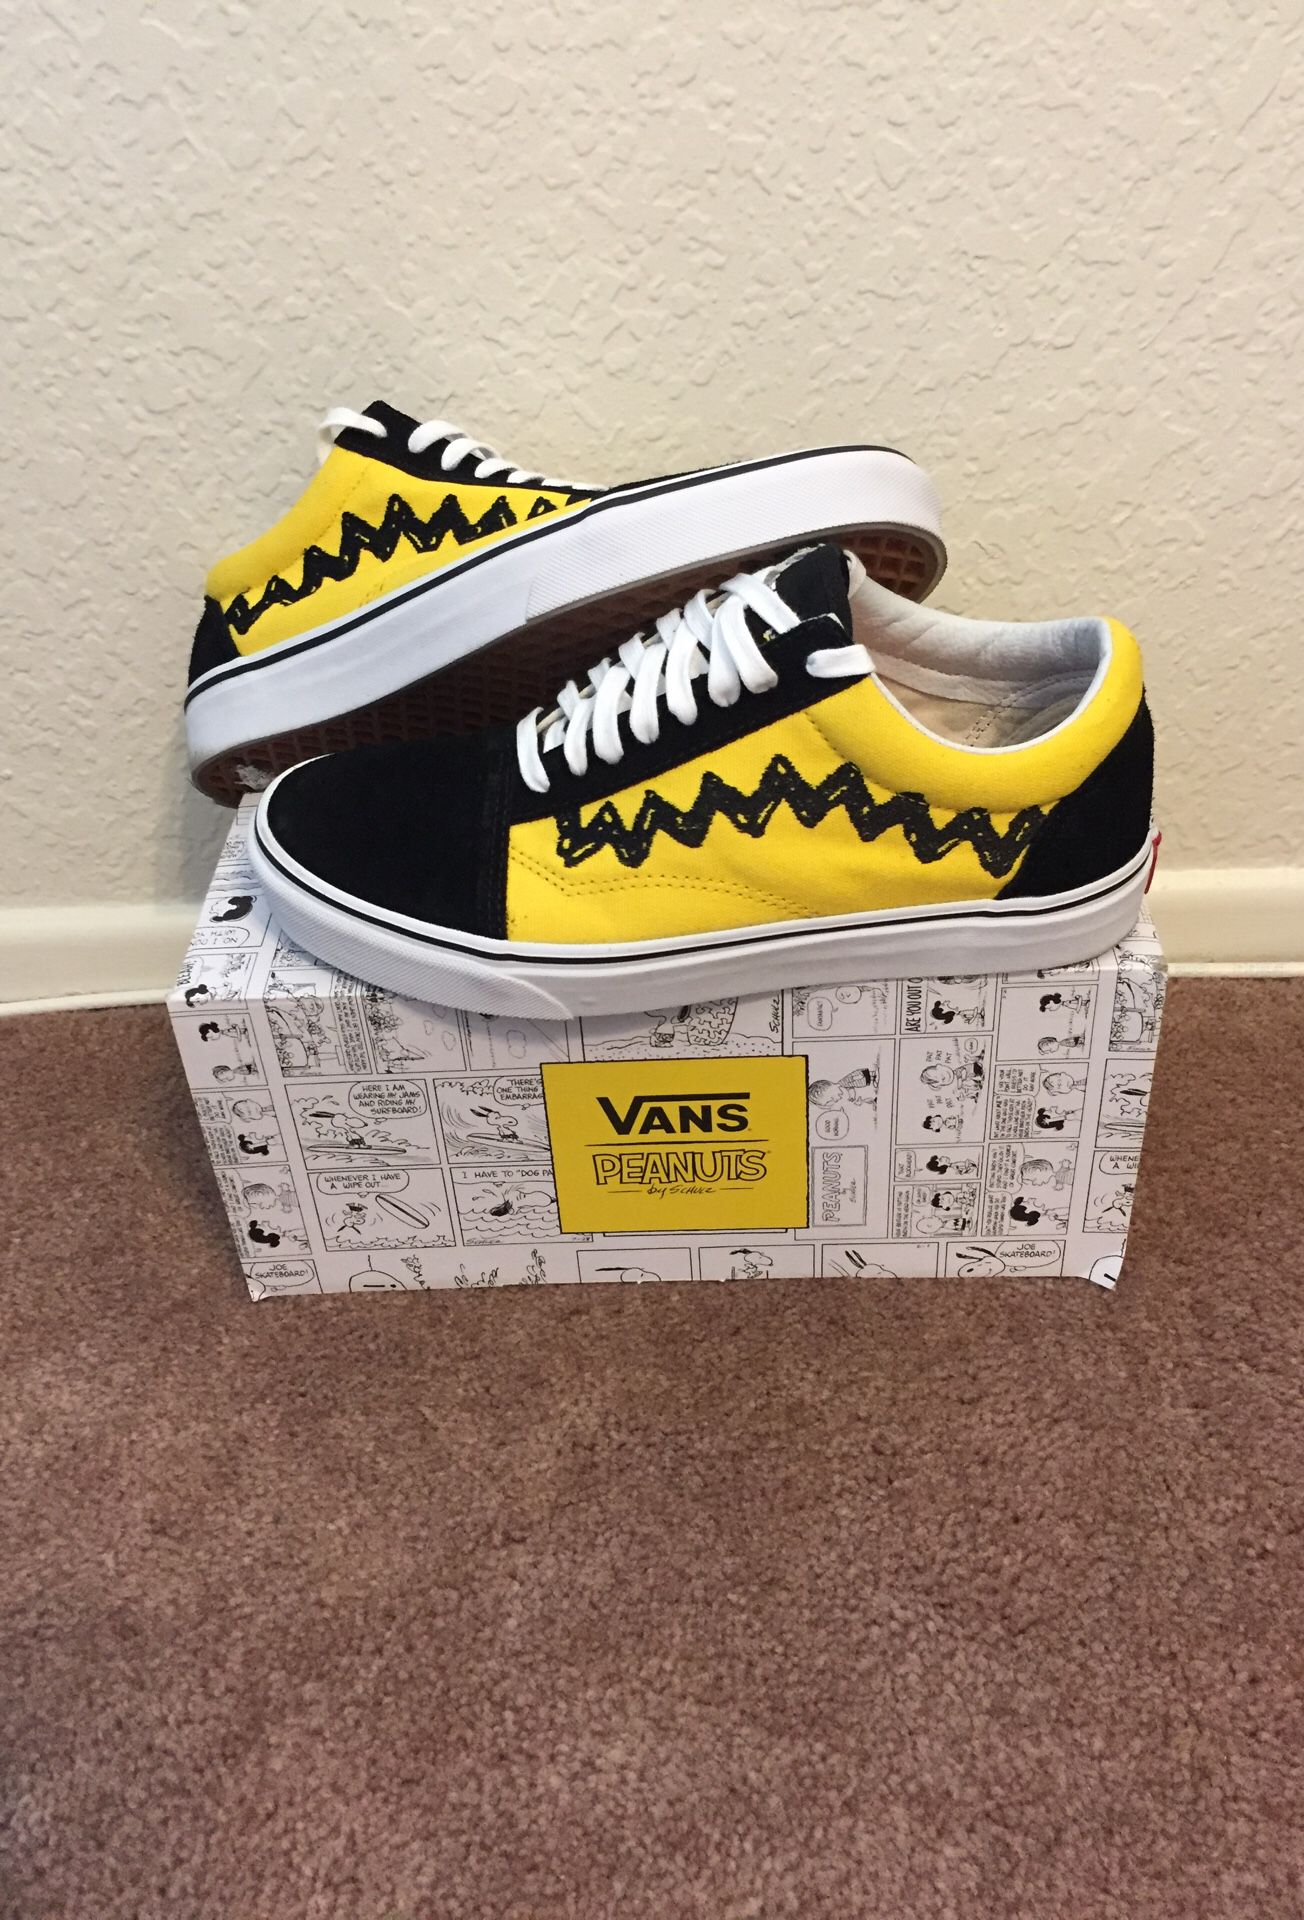 Vans Peanuts Charlie Brown Shoes Size 9 for in Hawthorne, CA - OfferUp